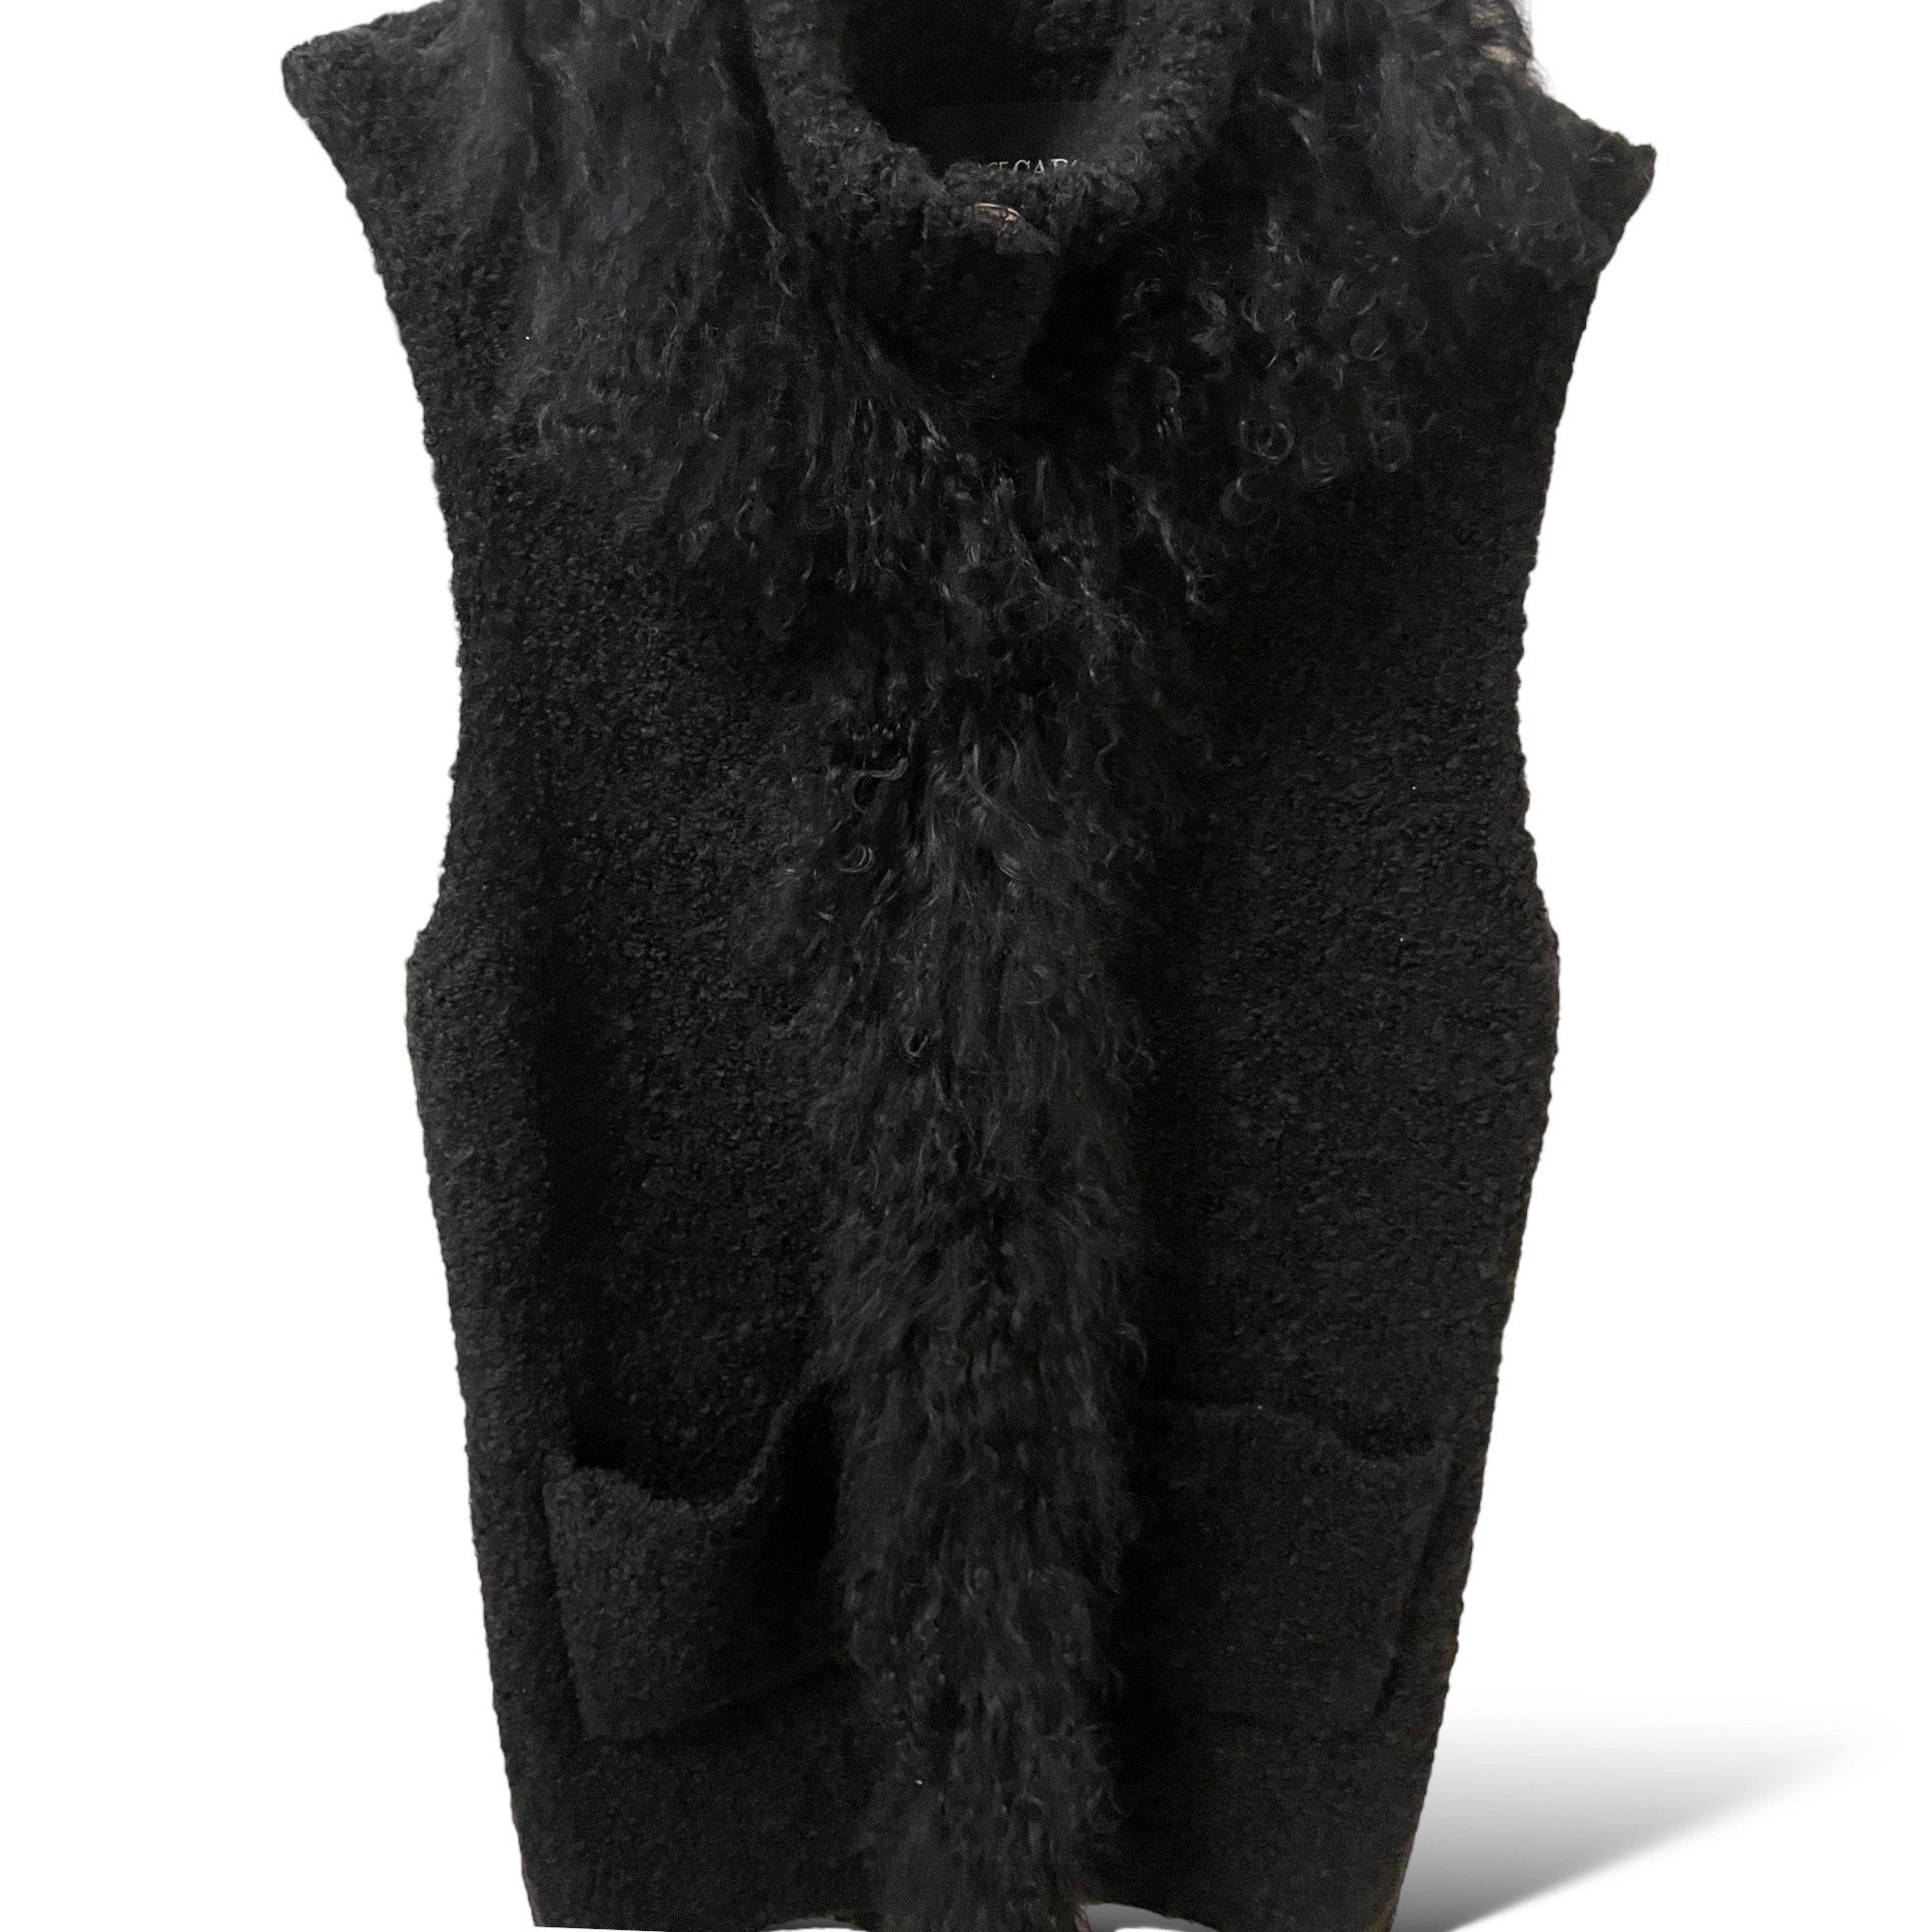 DOLCE CABO Wool Vest with Real Tibet Lamb Fur Trim |Size: M|